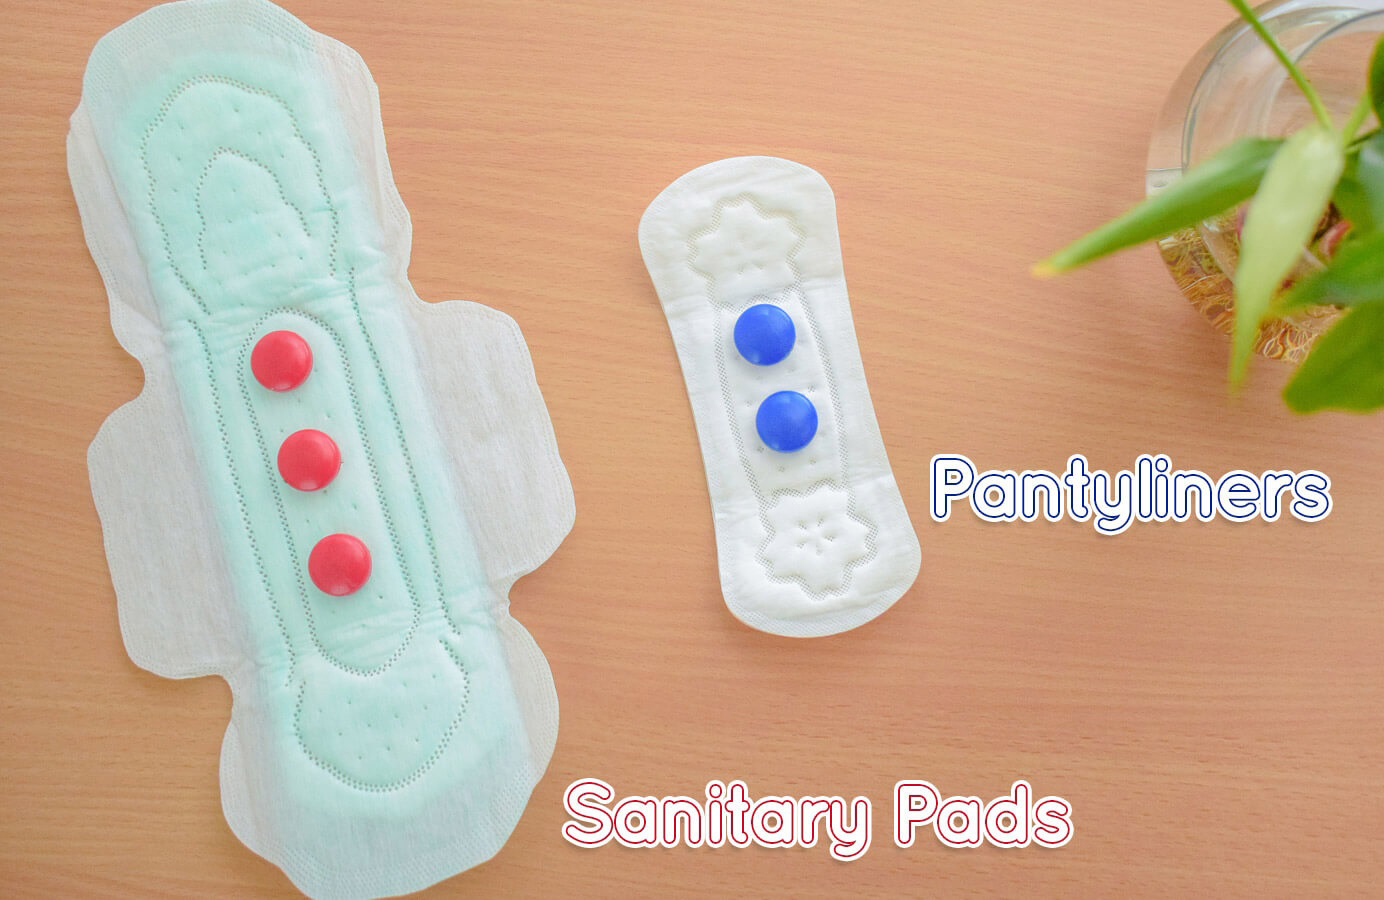 The Difference between Sanitary Napkins and Pantyliners